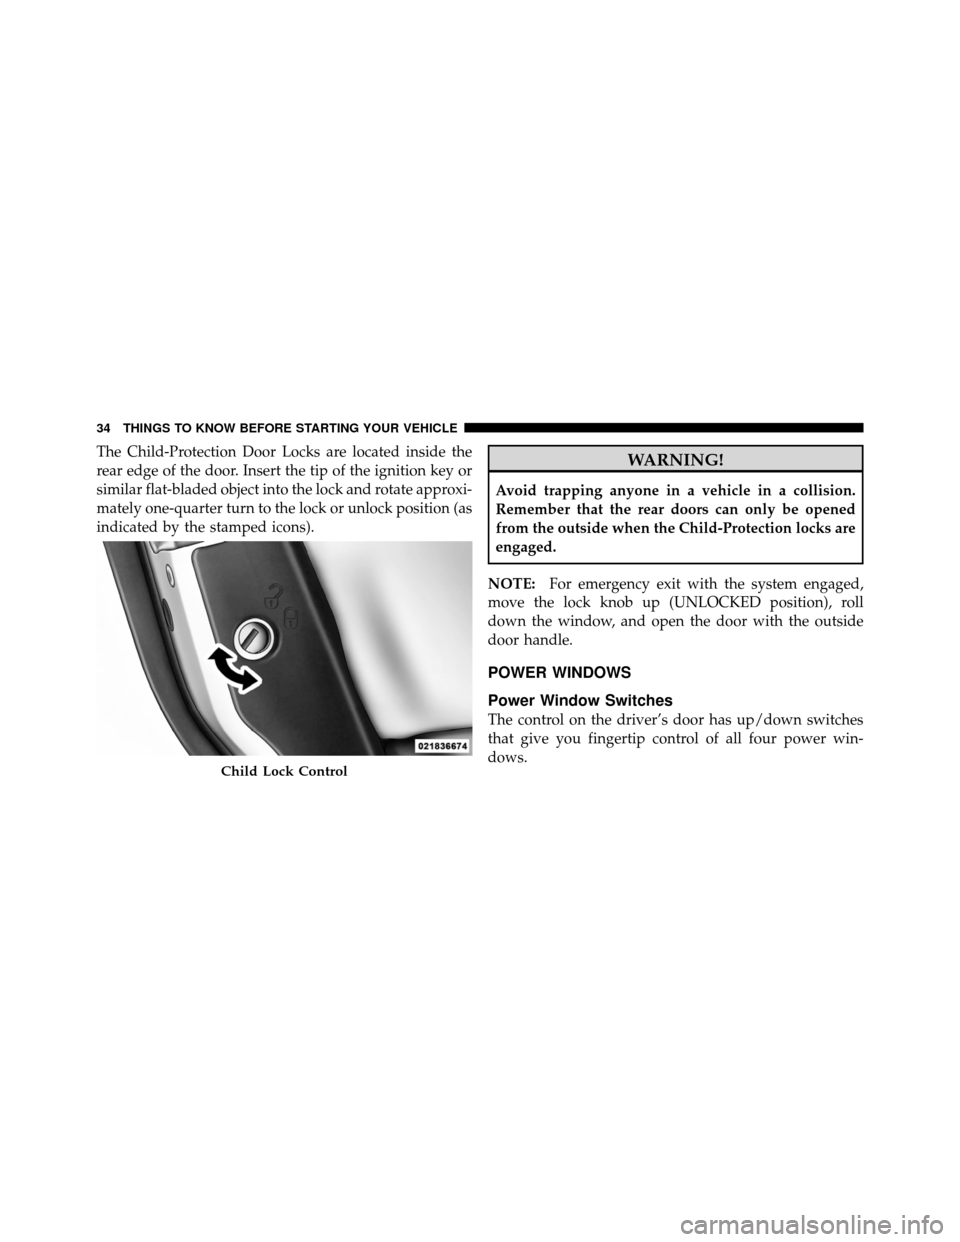 CHRYSLER 200 2011 1.G Owners Manual The Child-Protection Door Locks are located inside the
rear edge of the door. Insert the tip of the ignition key or
similar flat-bladed object into the lock and rotate approxi-
mately one-quarter turn